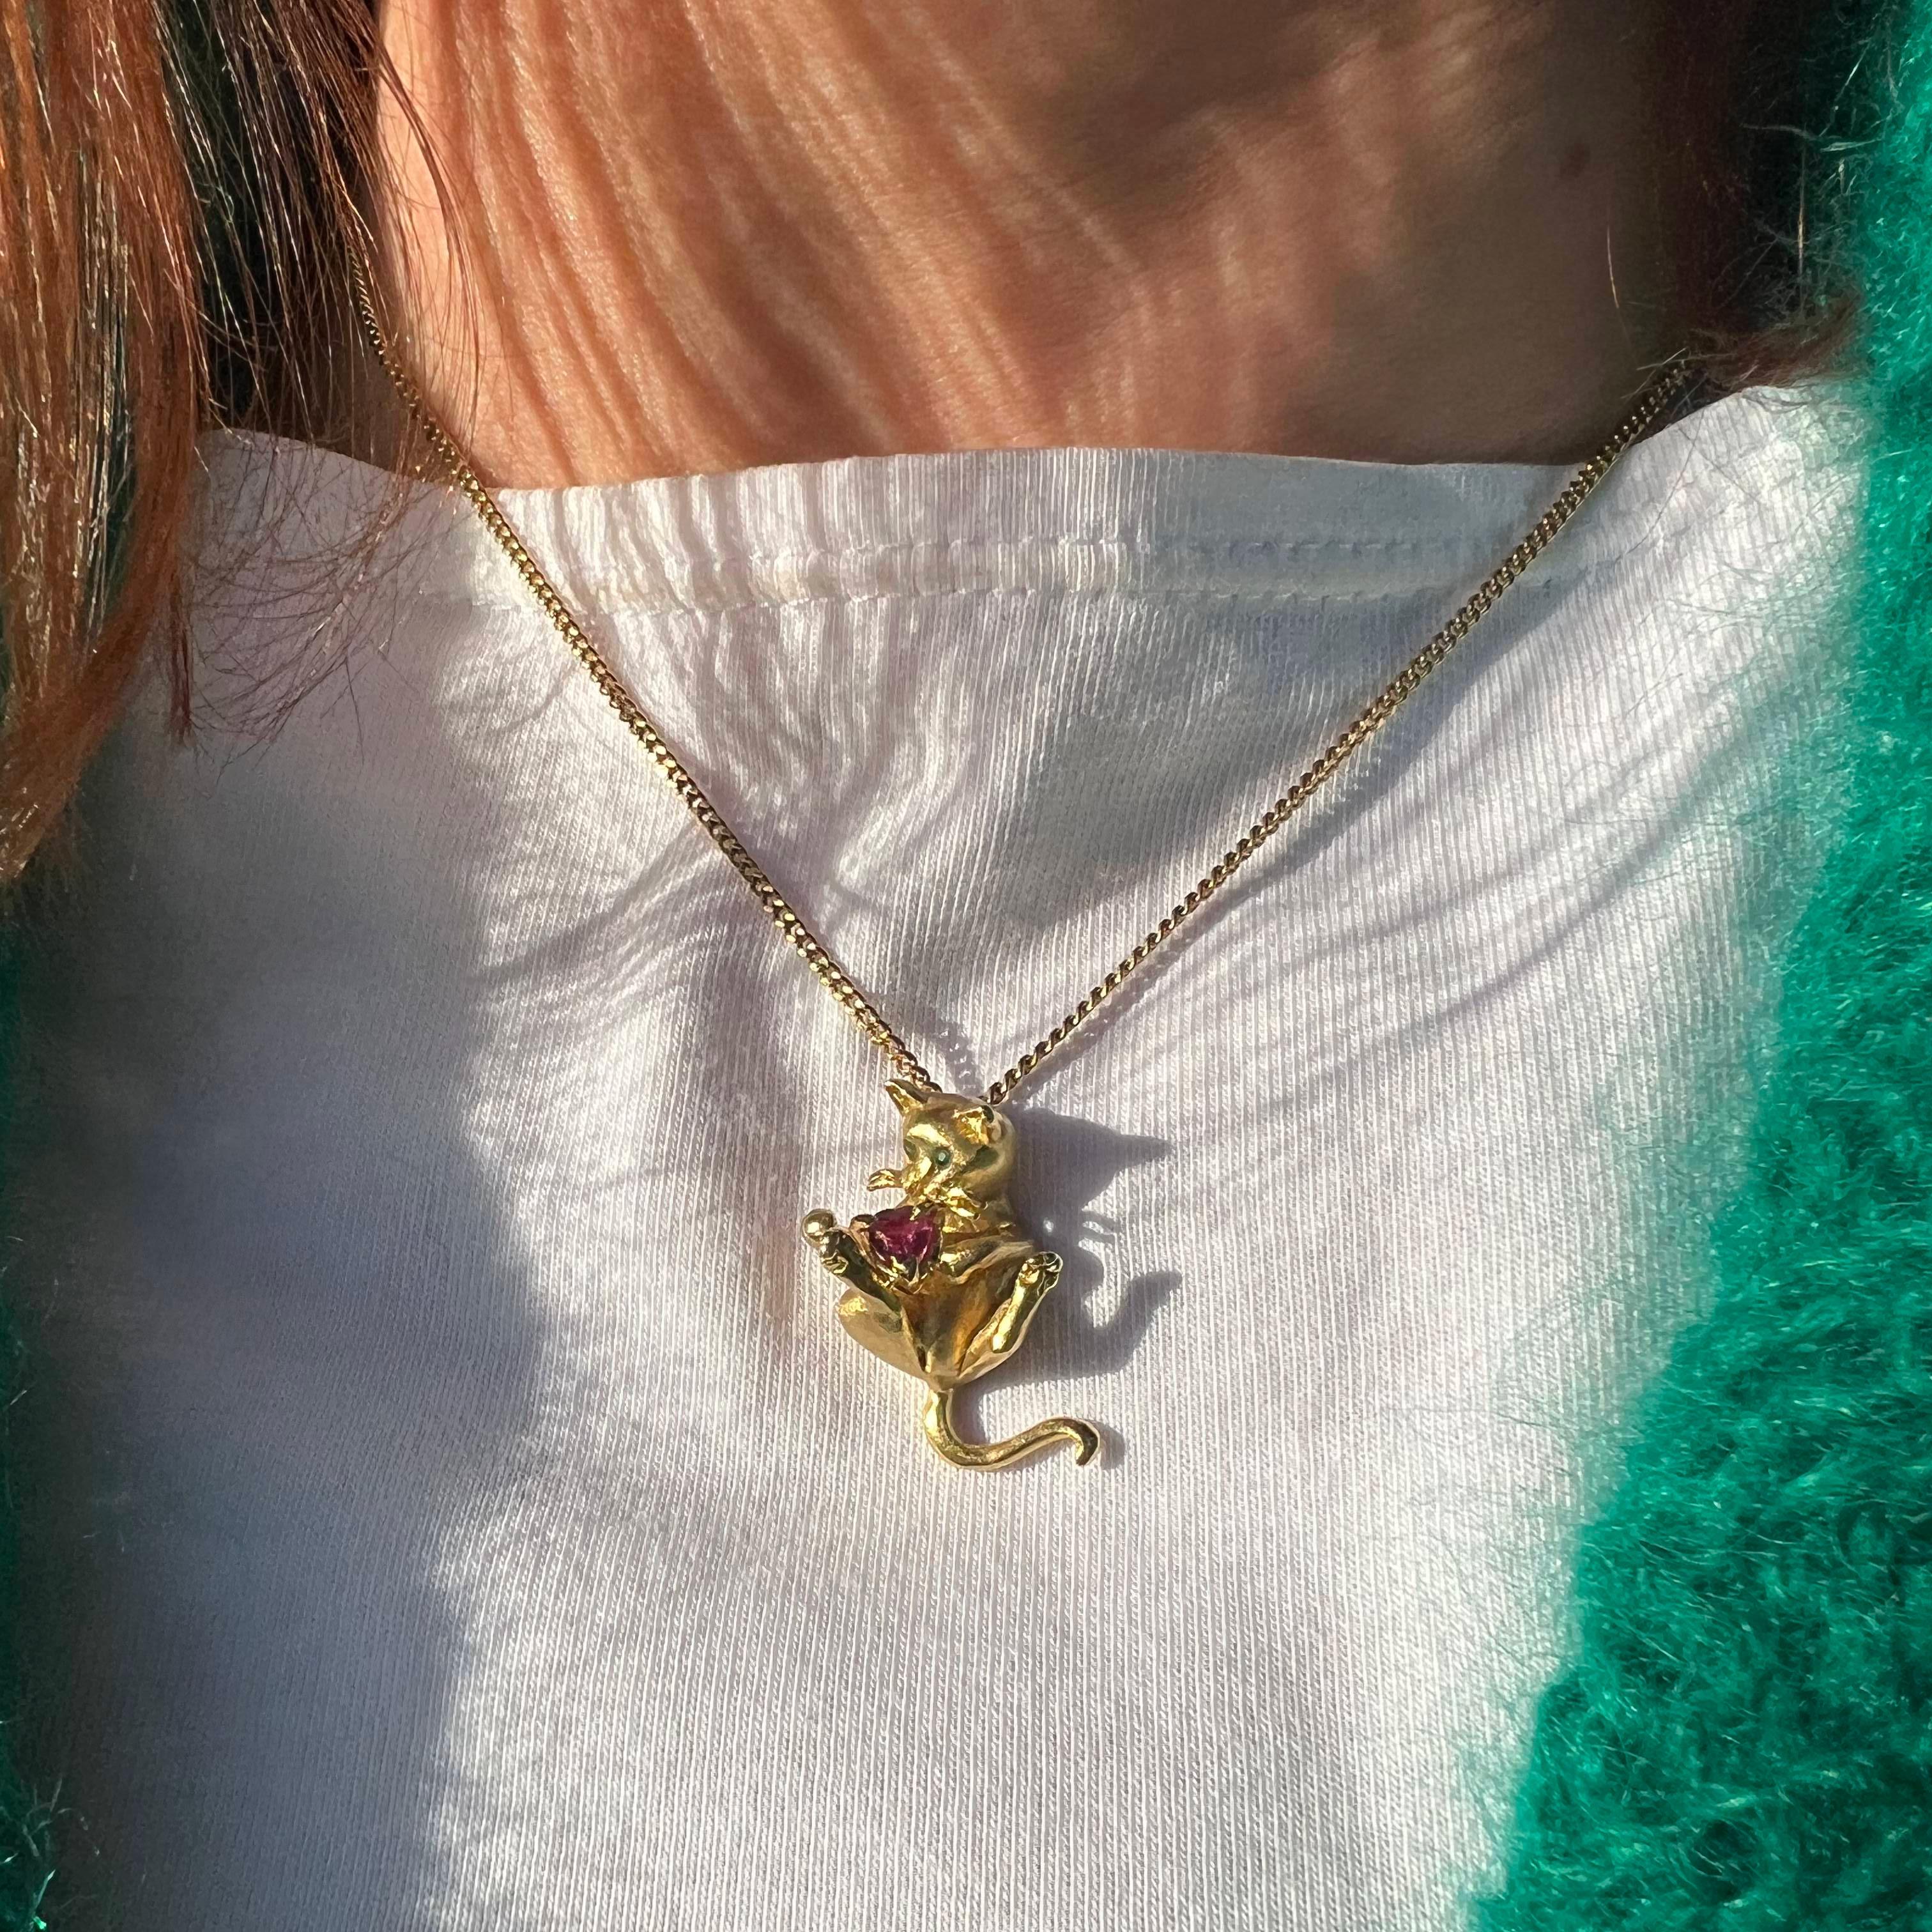 Fred Paris 18kt. yellow gold chain necklace with kitty holding ruby pendant. 

Introducing the exquisite Fred of Paris necklace, featuring a meticulously crafted kitty pendant. This stunning piece showcases remarkable attention to detail, capturing